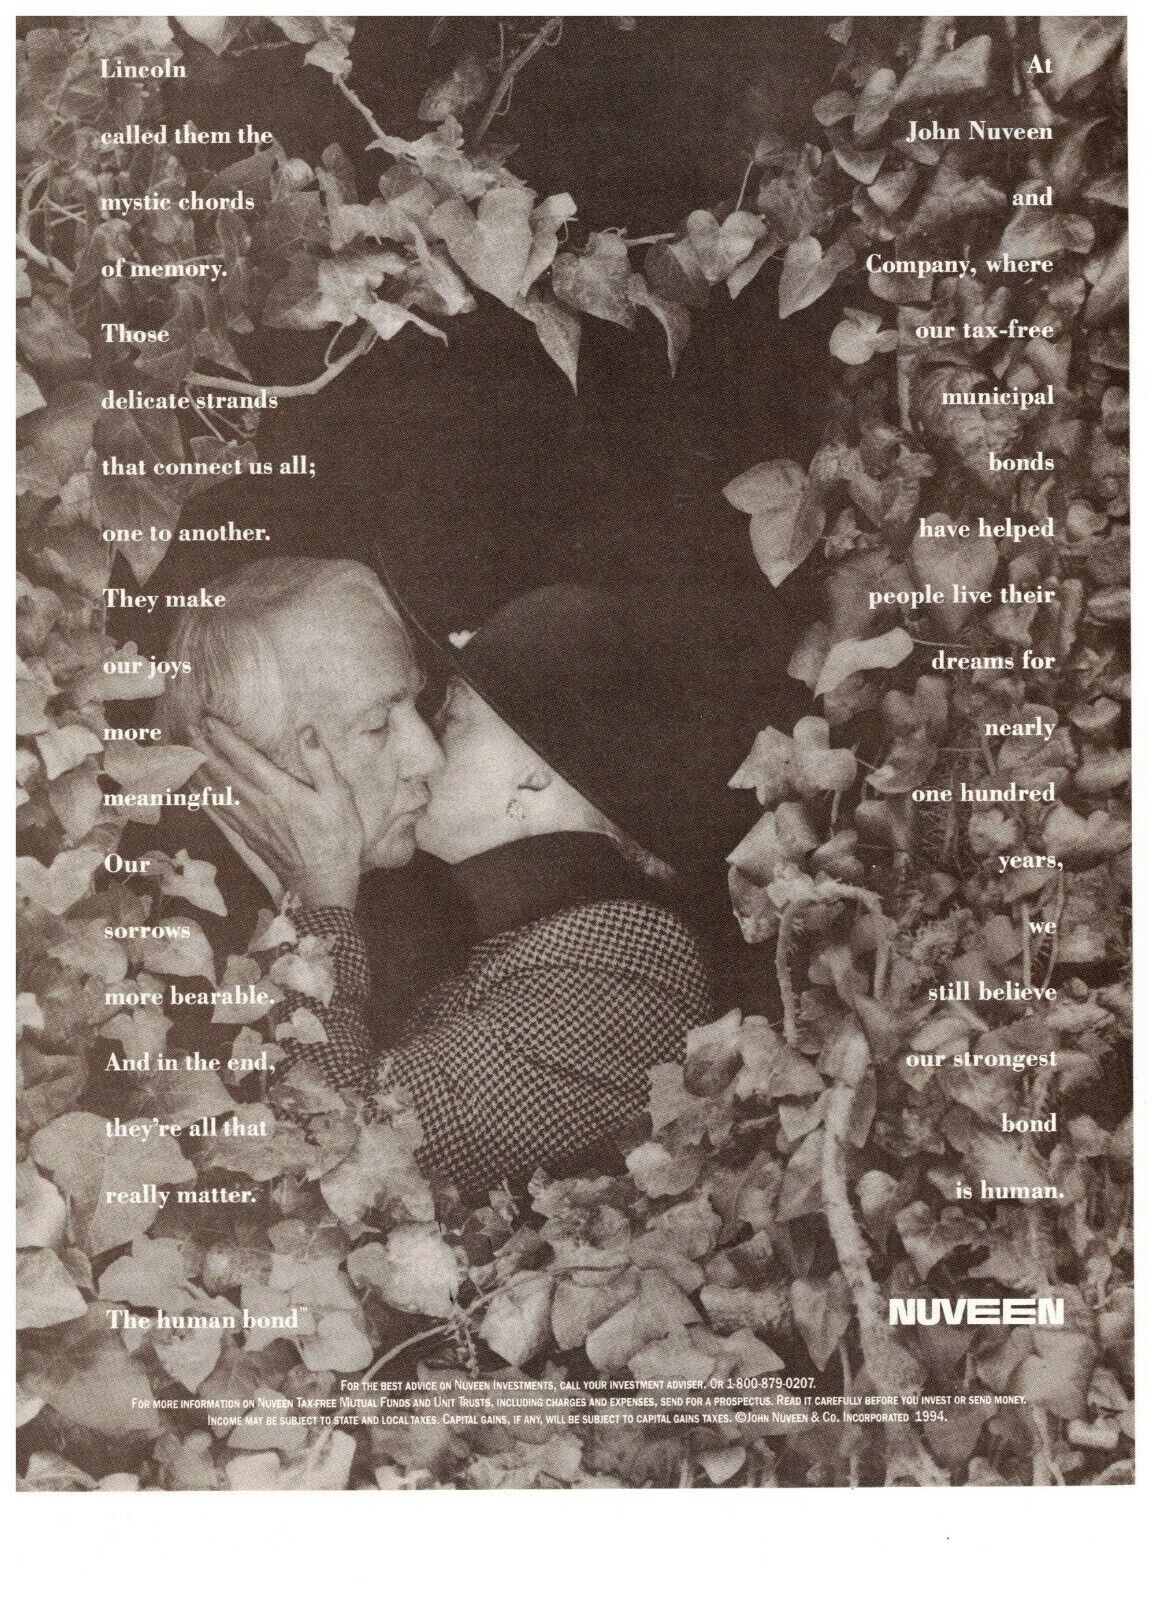 Nuveen Human Bond Kissing in the Bushes Elderly Couple Vintage 1995 Print Ad